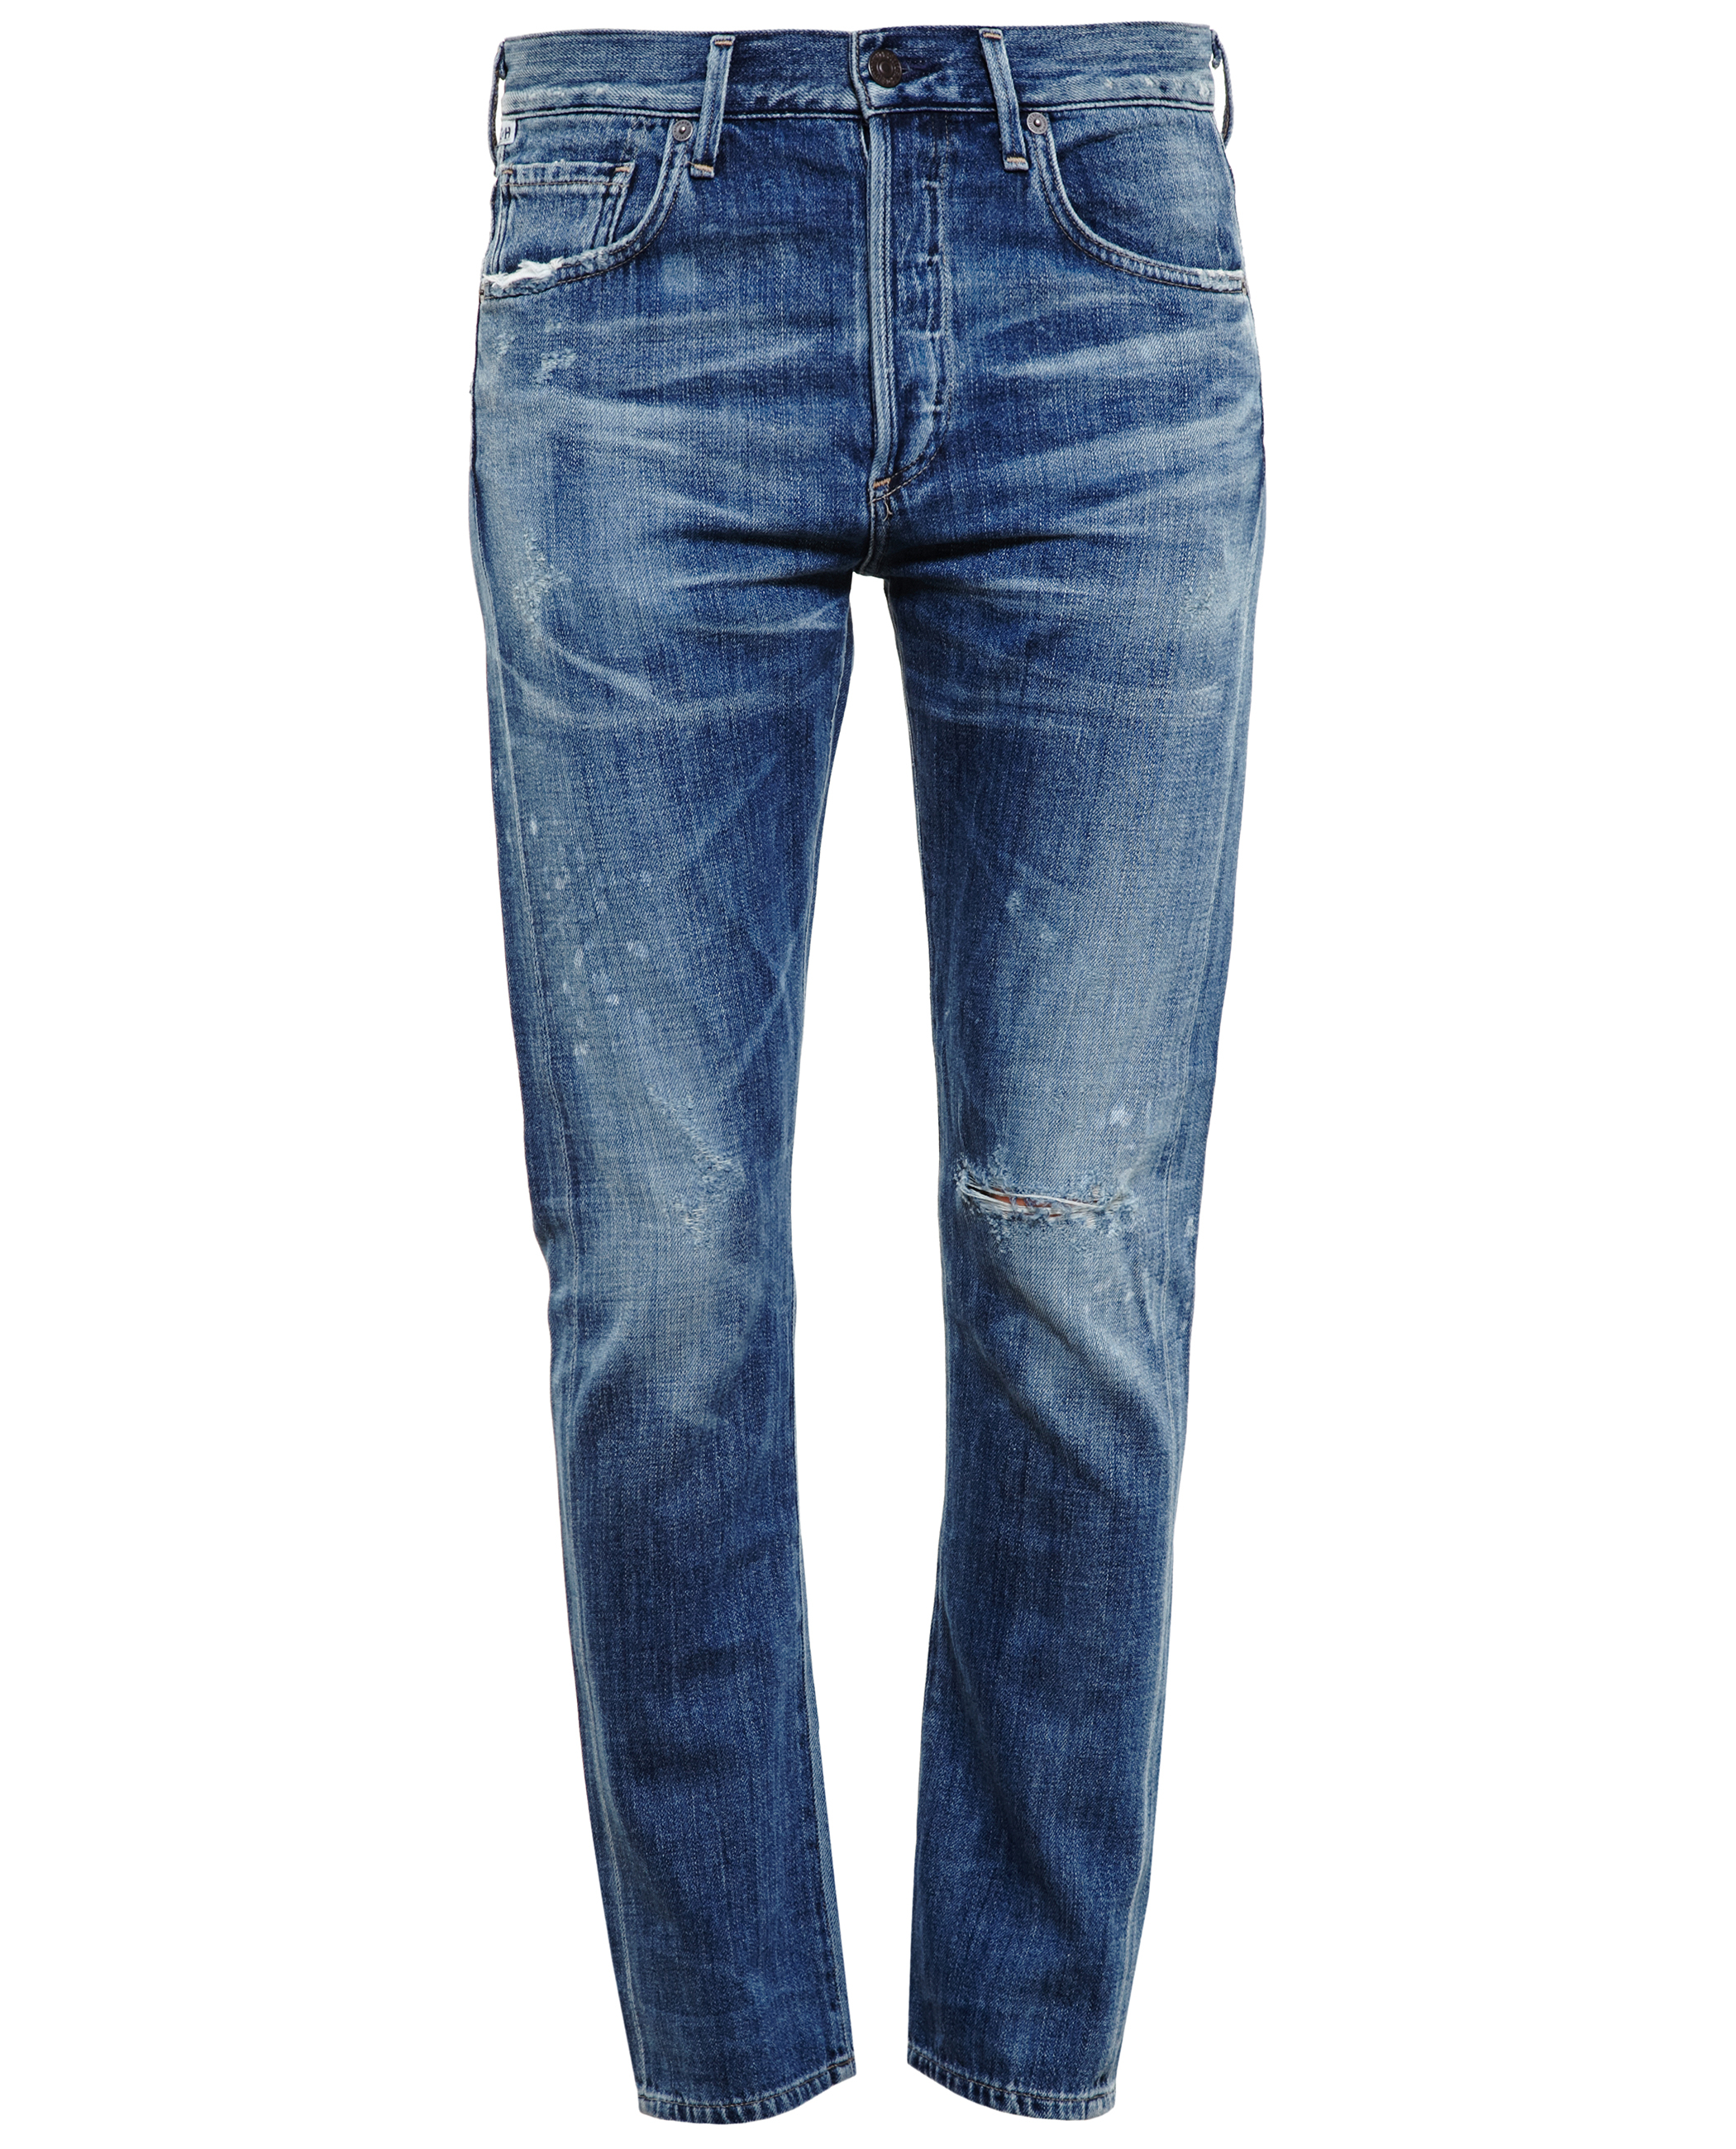 Lyst - Citizens Of Humanity Corey Slouchy Slim Jeans in Blue